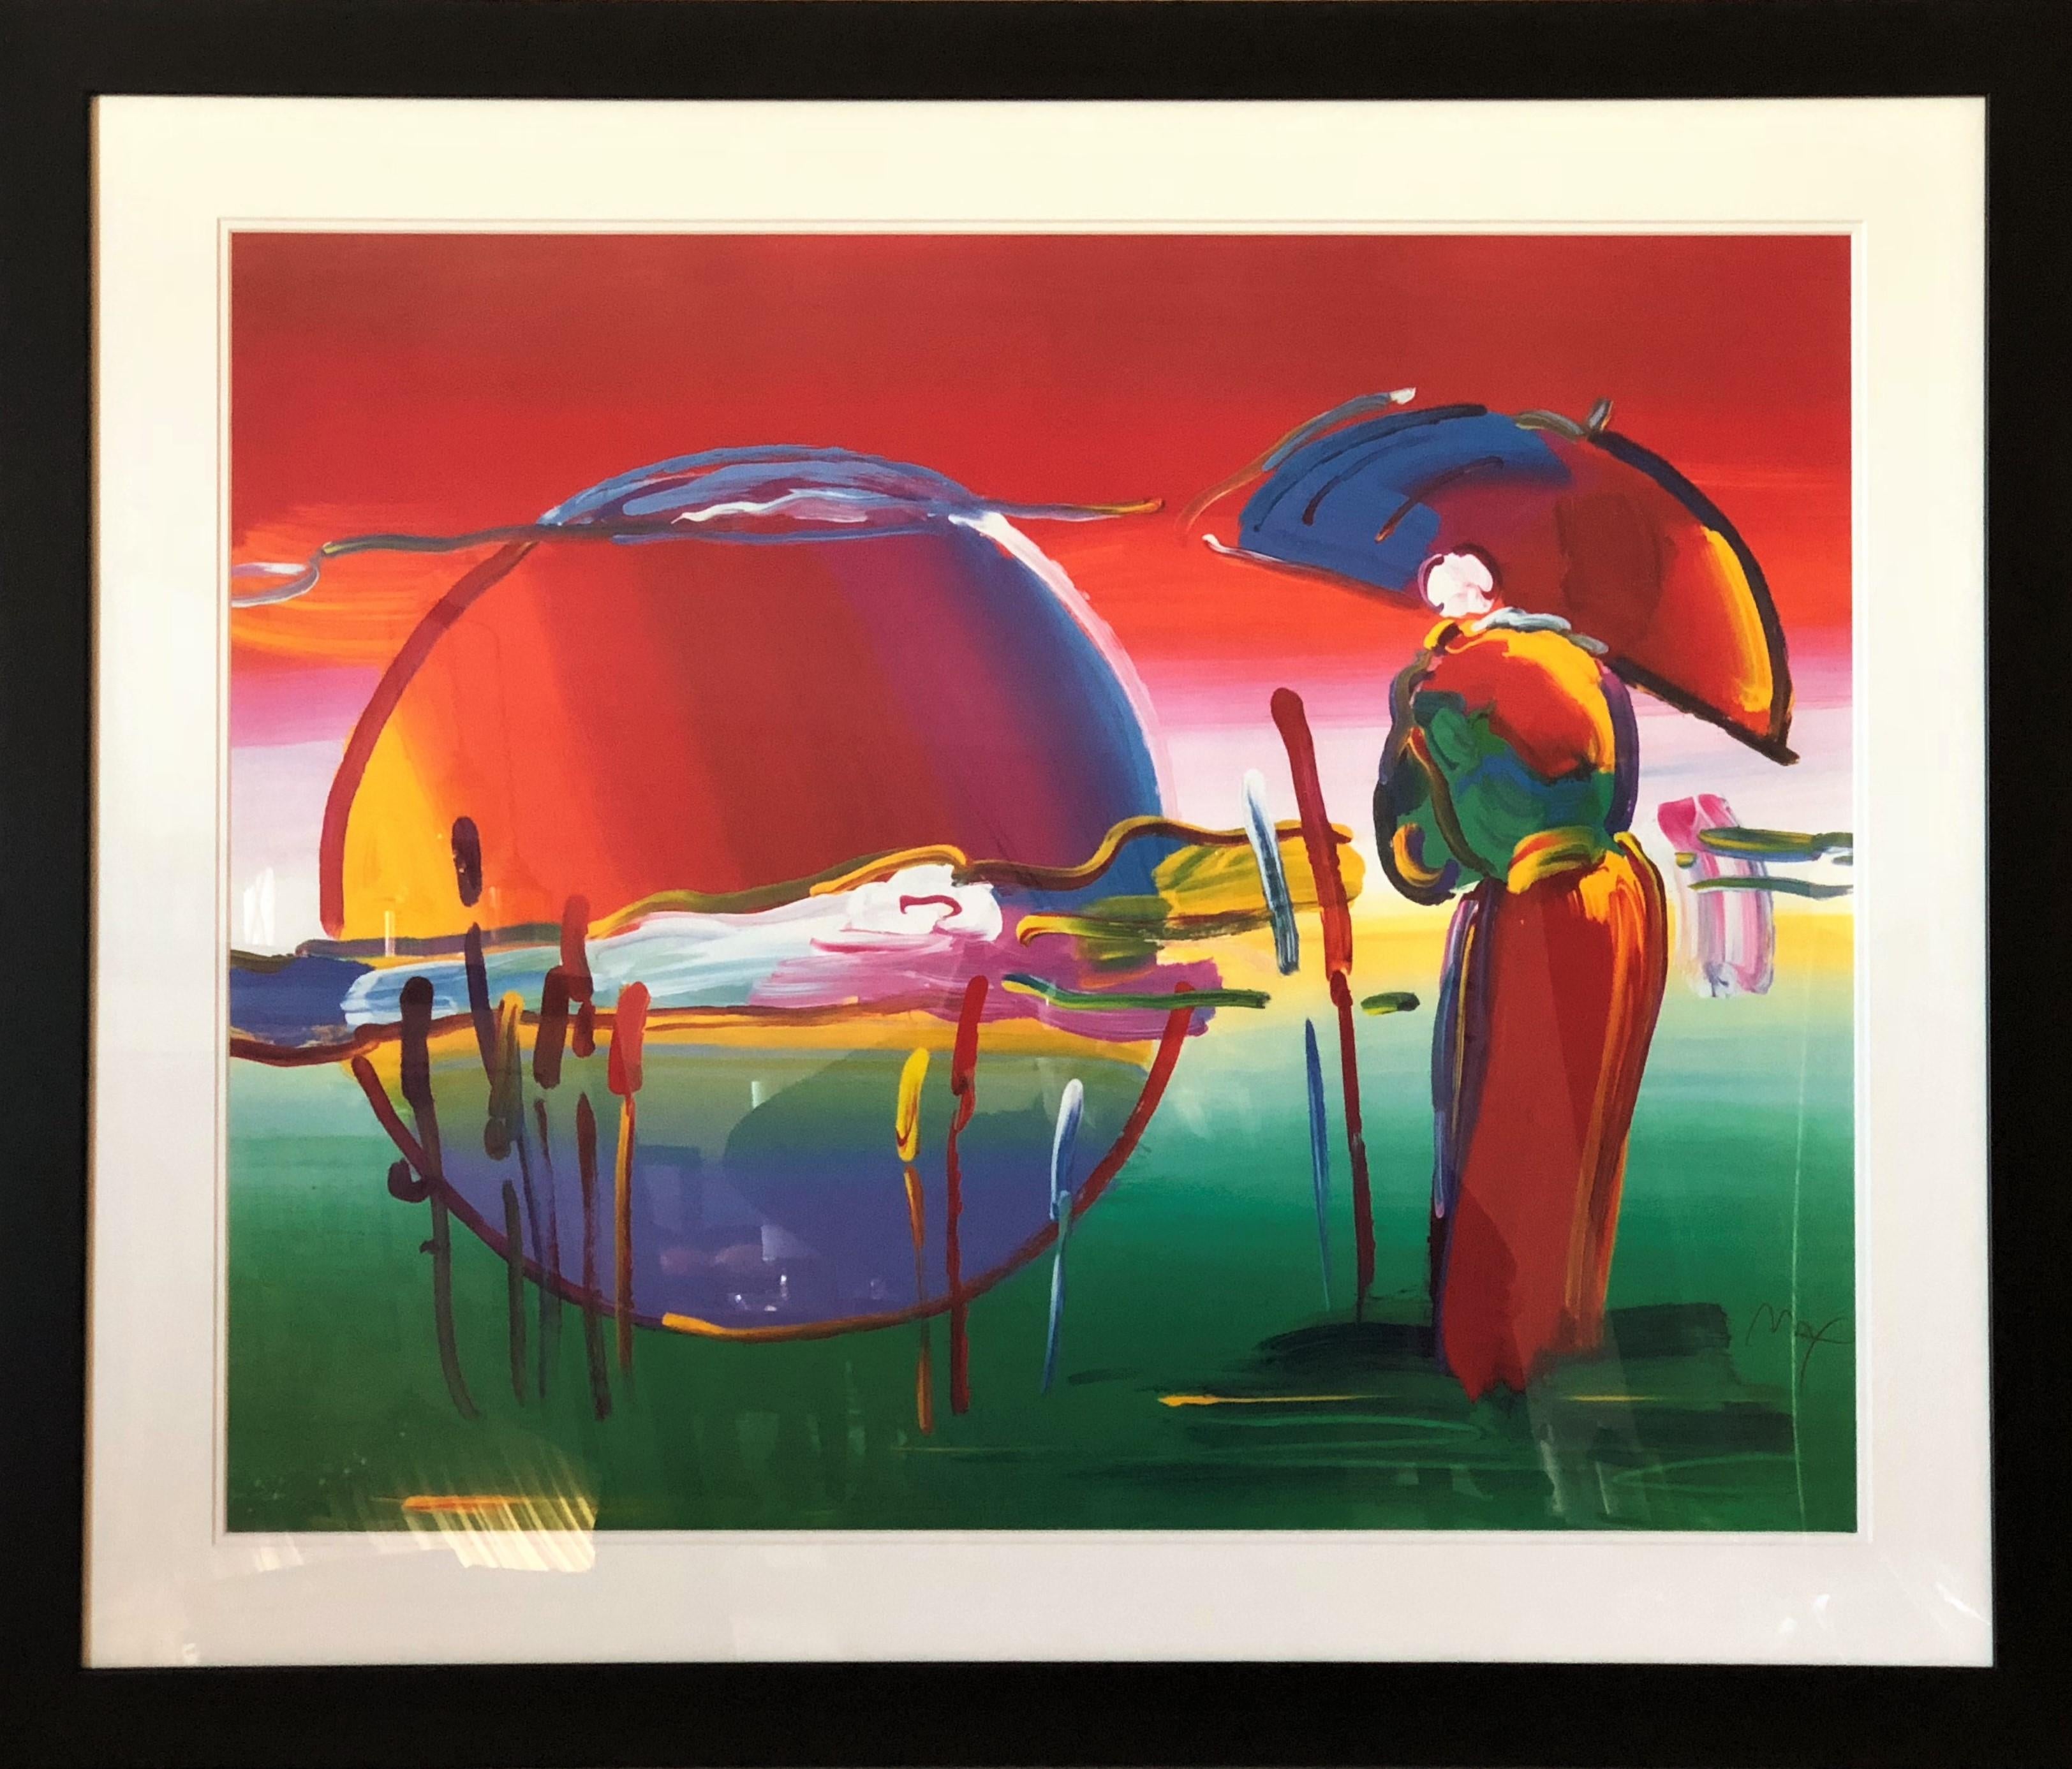 Rainbow Umbrella Man In Reeds - Limited Edition Lithograph by Peter Max